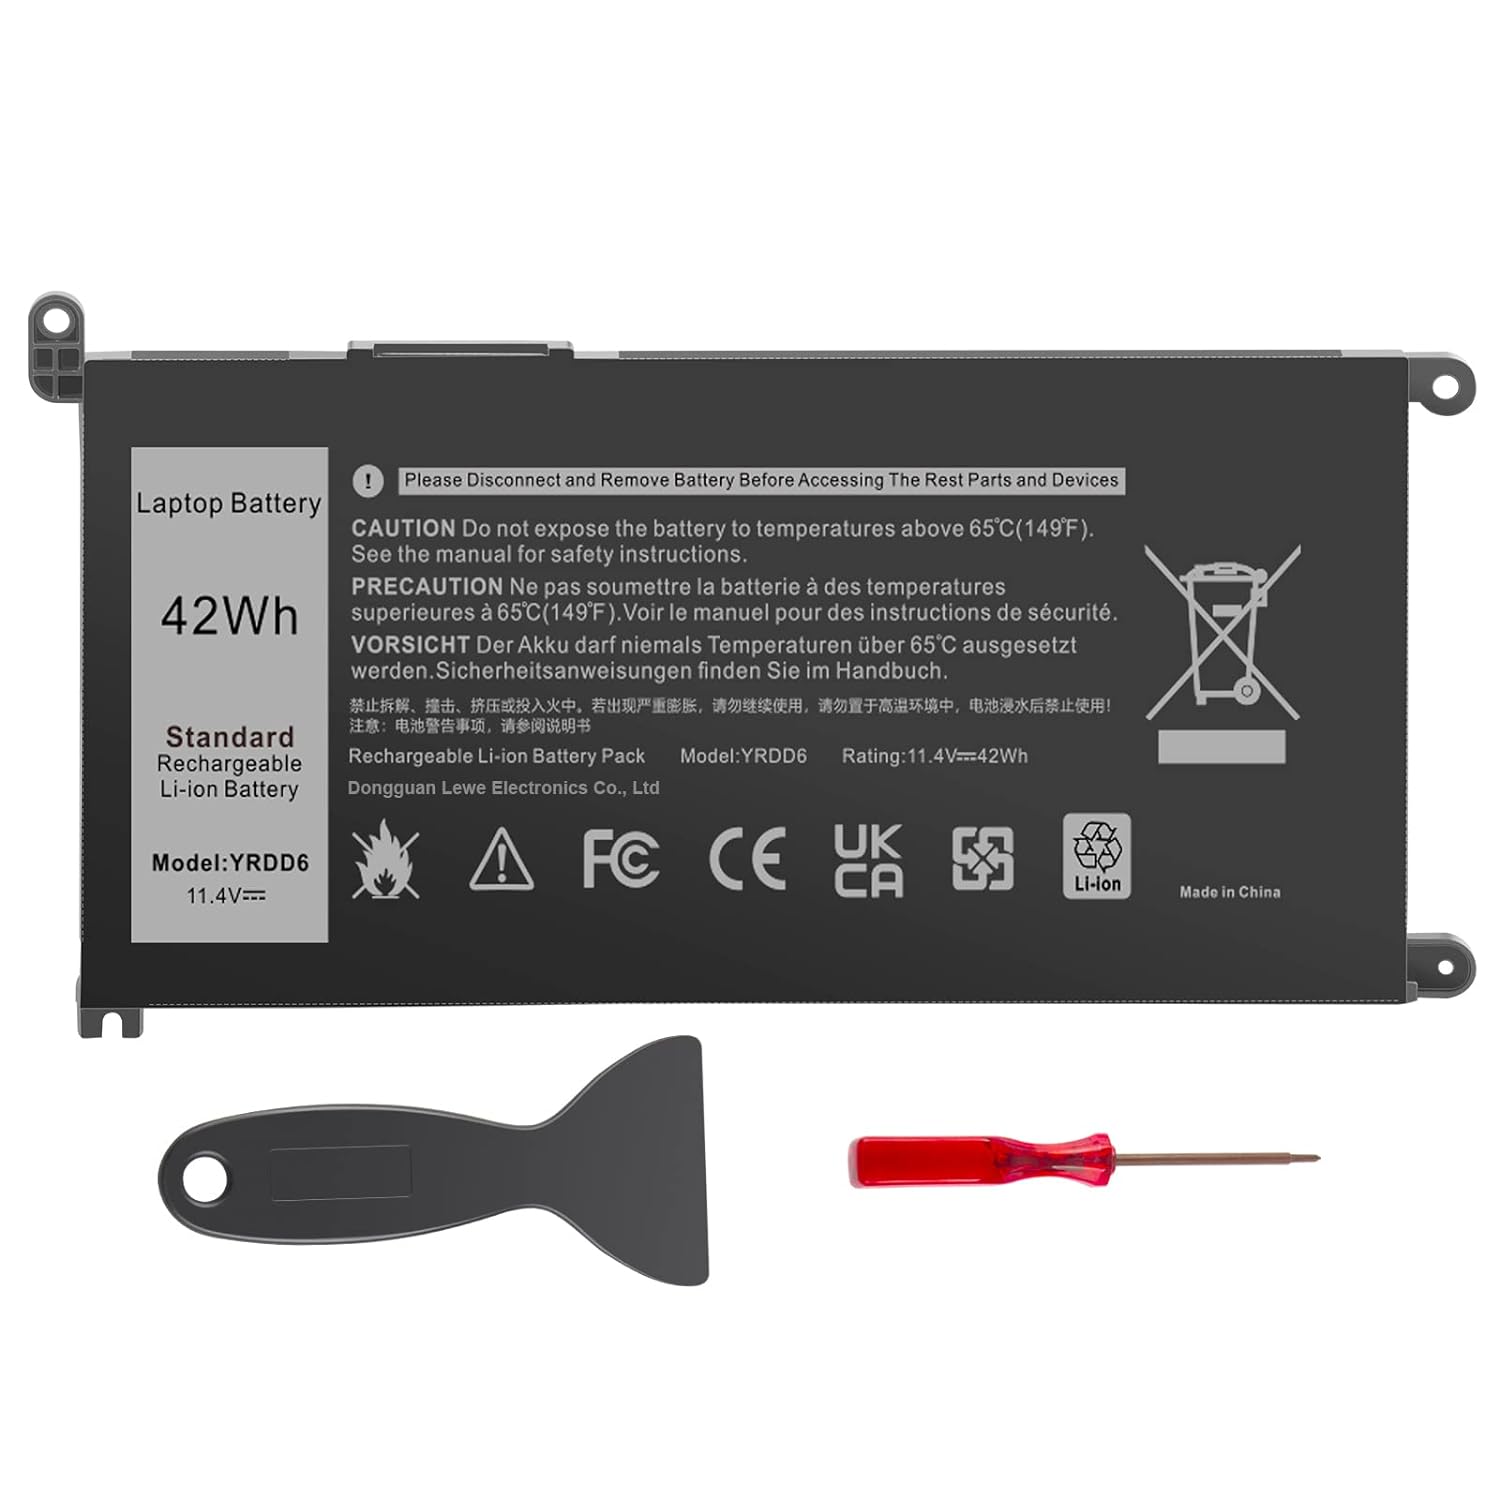 thinkstar 1Vx1H Battery For Dell Inspiron 3310 3583 5481 5482 5485 5491 5591 7586 2-In-1 3493 3501 3582 3584 3593 3793 5480 5493 5581 5…